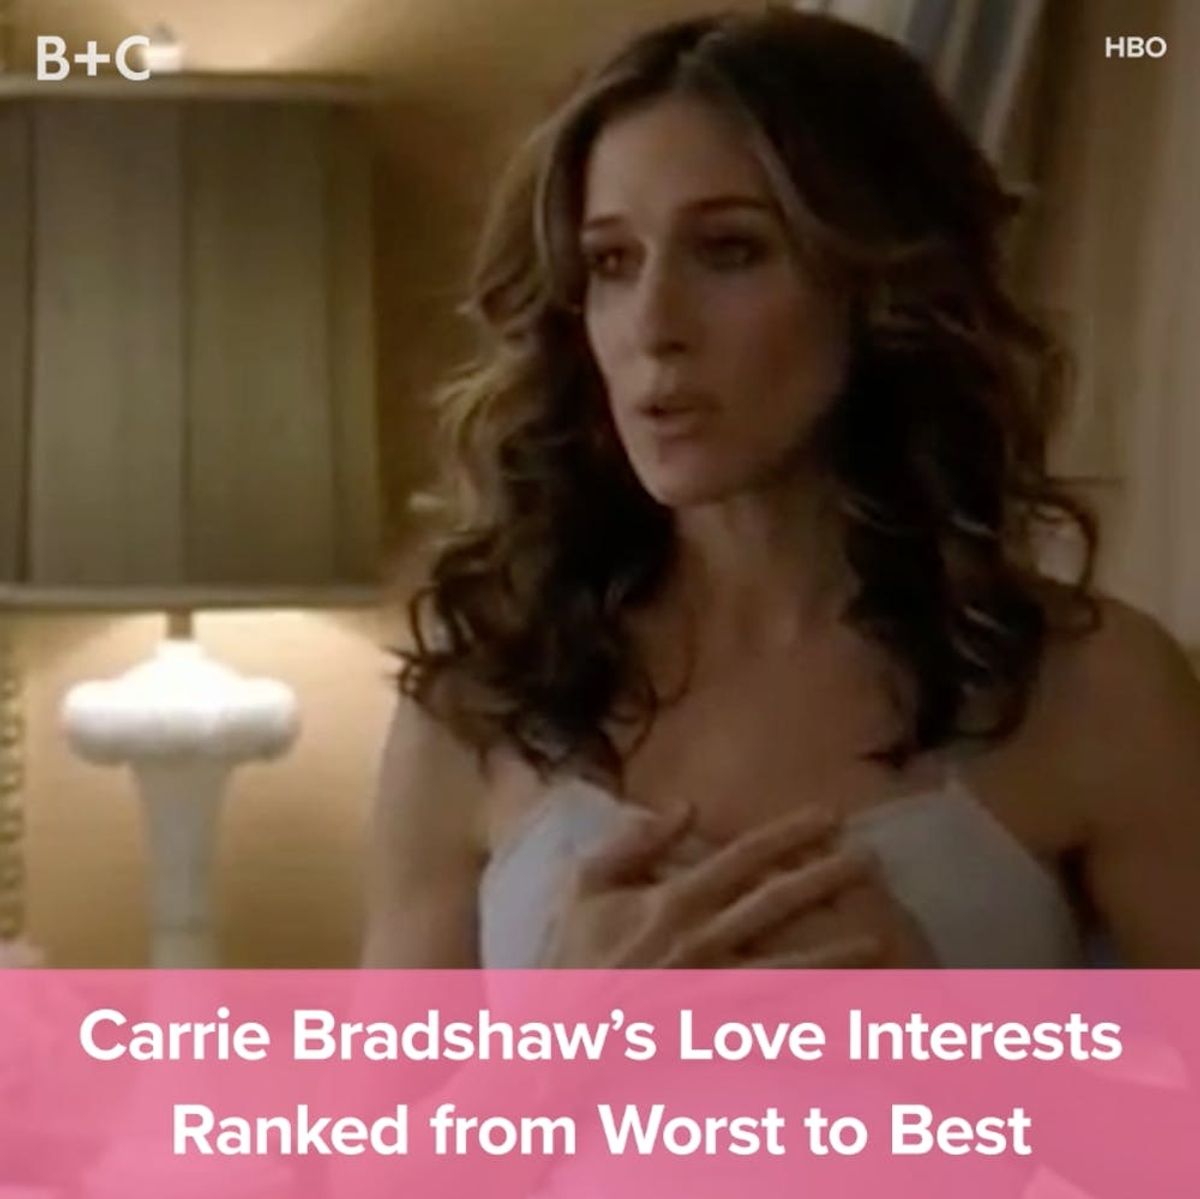 Carrie Bradshaw’s Love Interests Ranked from Worst to Best